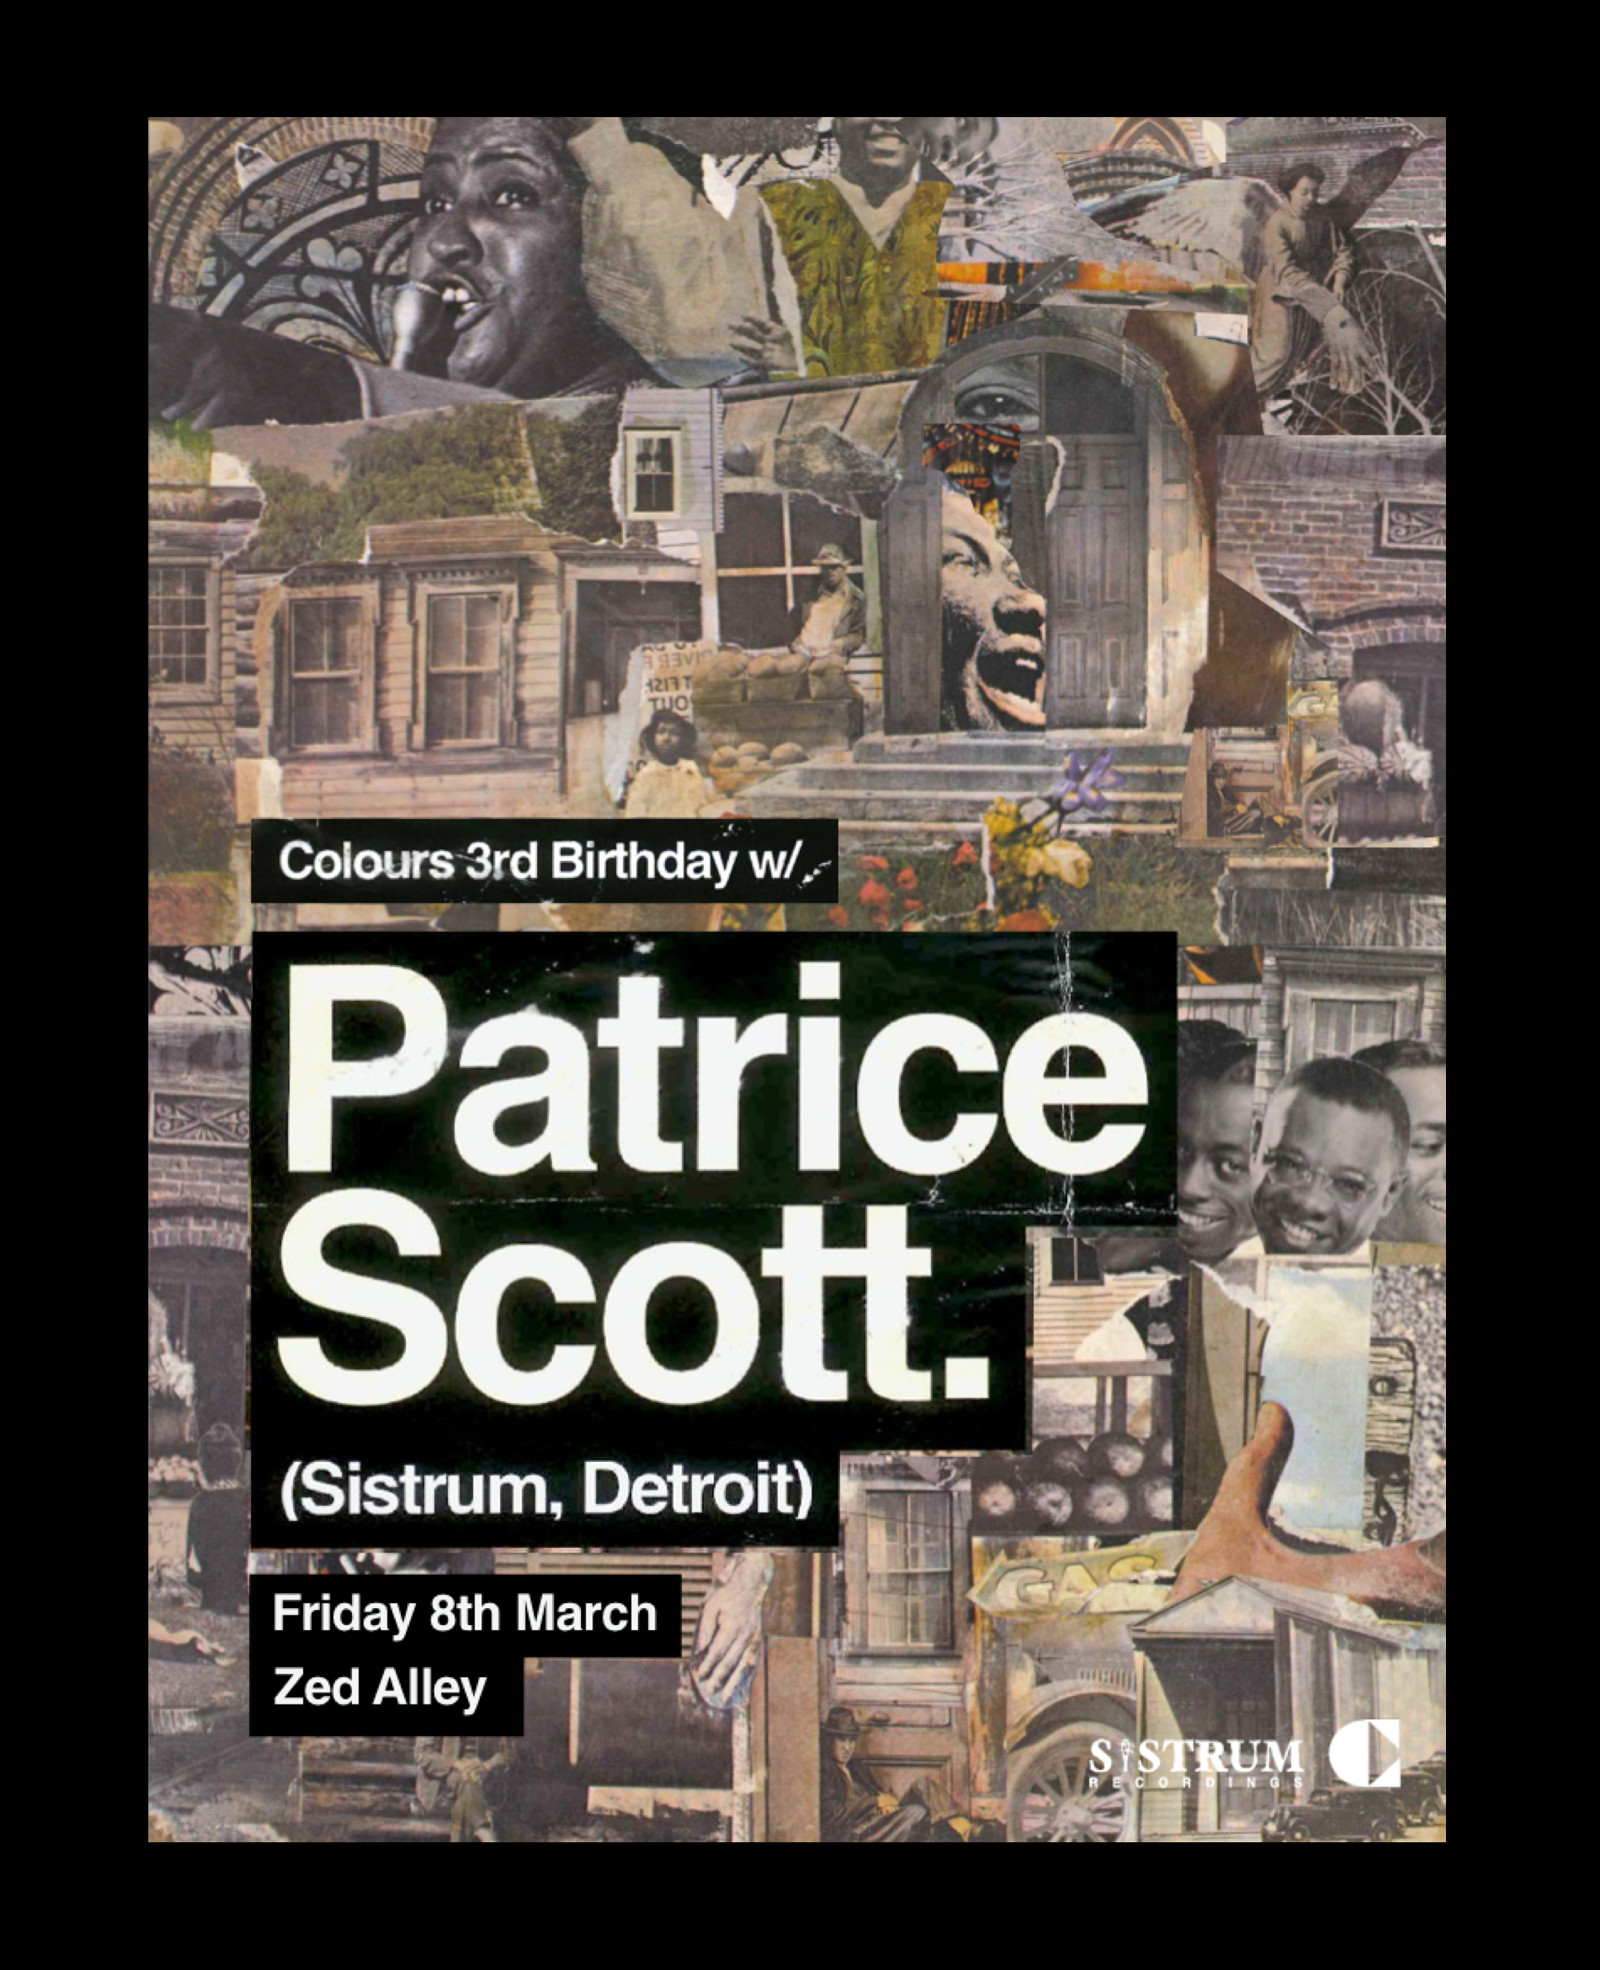 Colours 3rd Birthday w/ Patrice Scott at Zed Alley